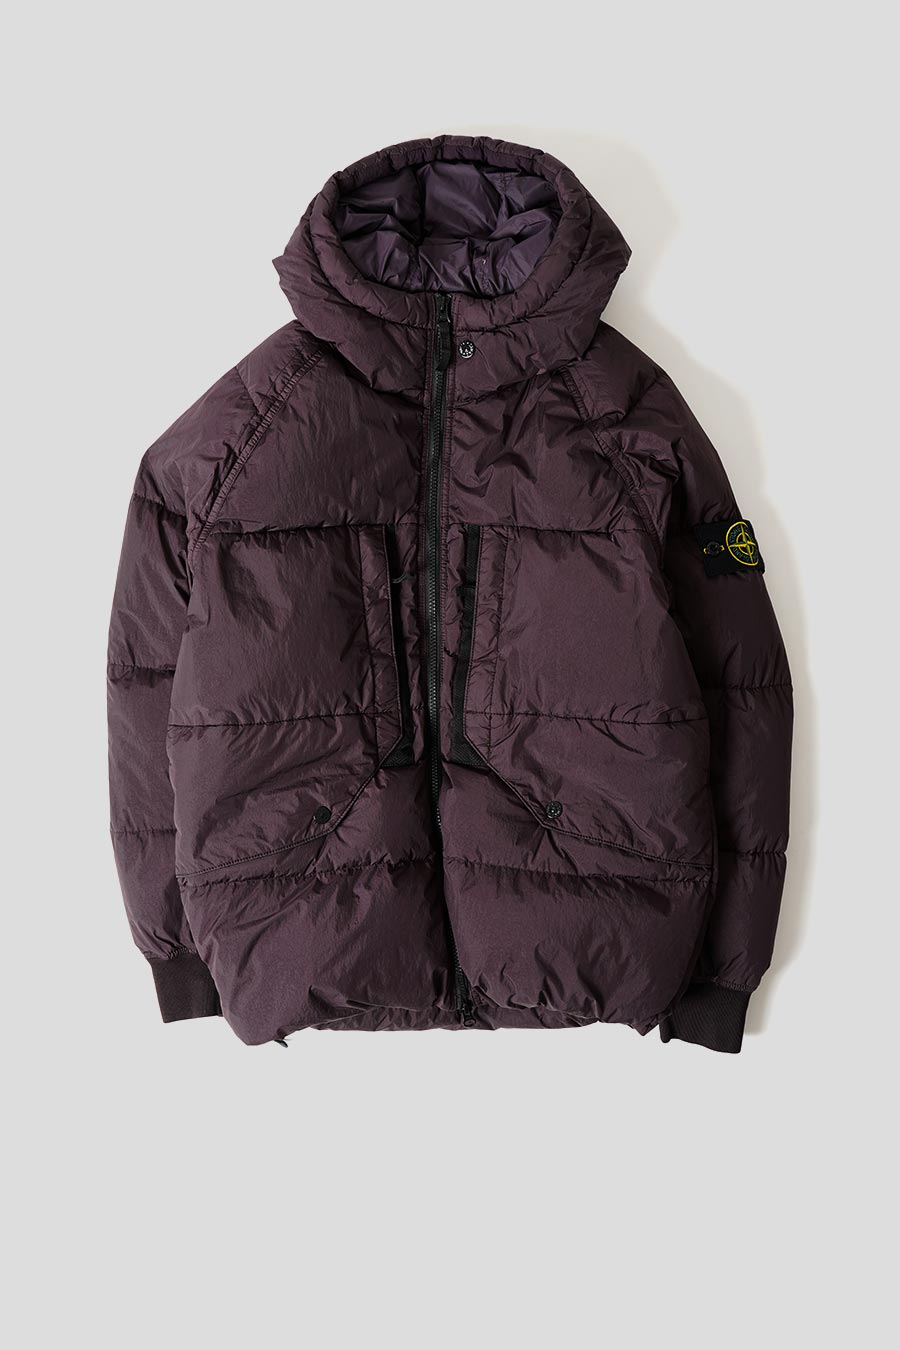 Stone Island - VESTE GARMENT DYED CRINKLE REPS RECYCLED NYLON DOWN ROUGE VIGNE - LE LABO STORE